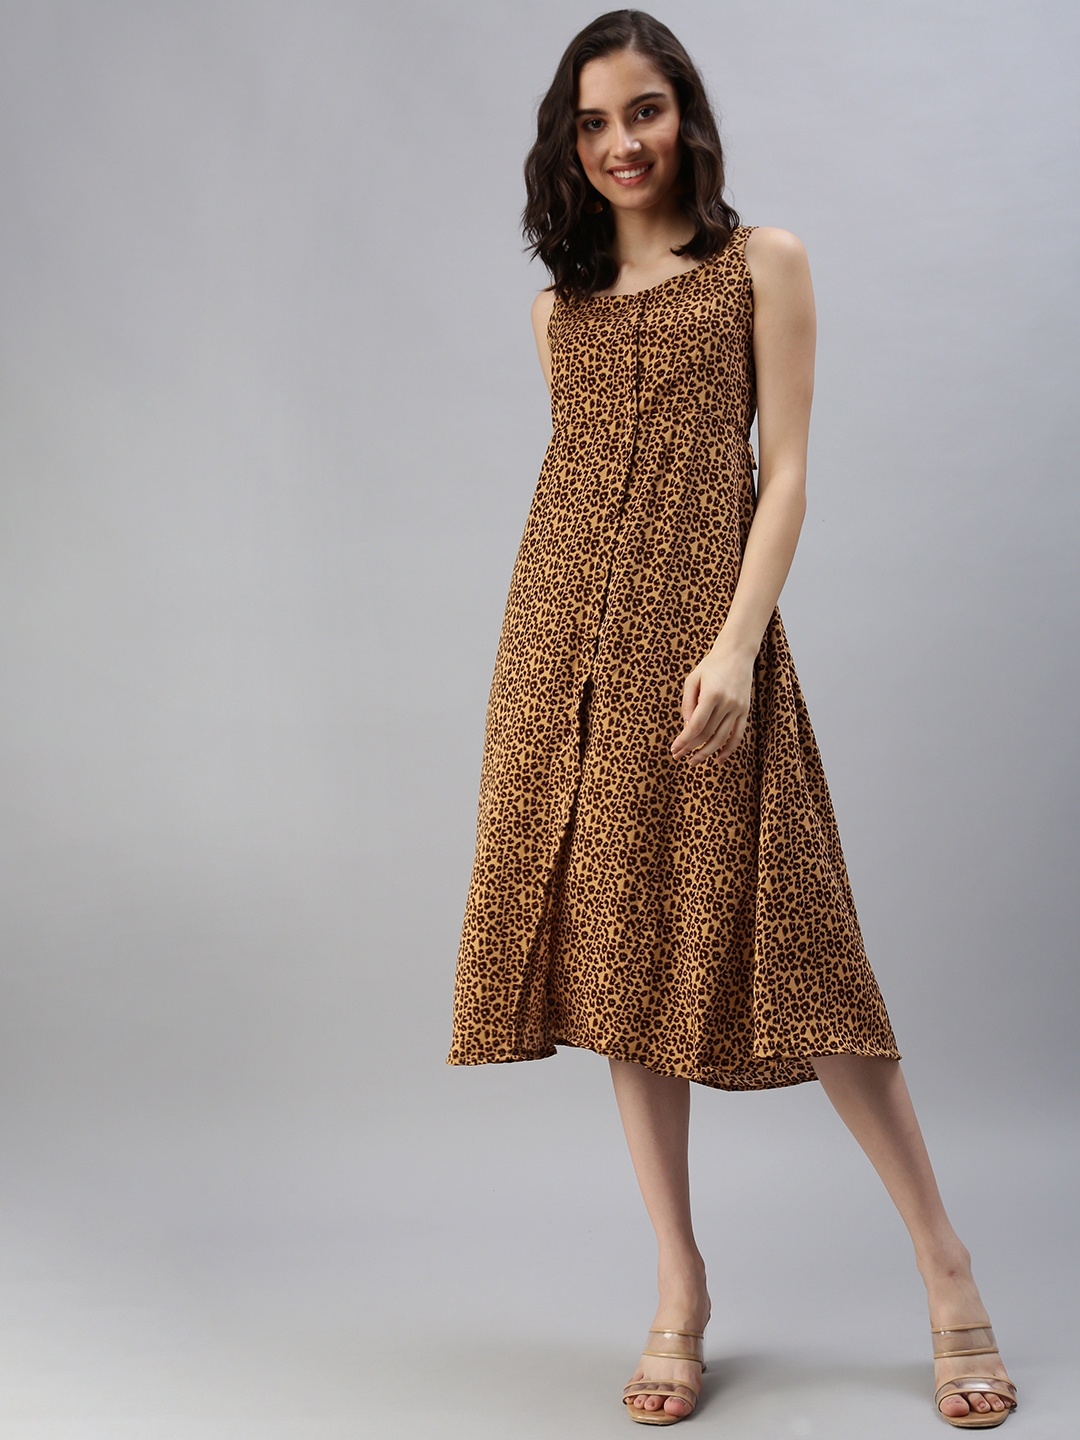 Women's Brown Polyester Printed Dresses